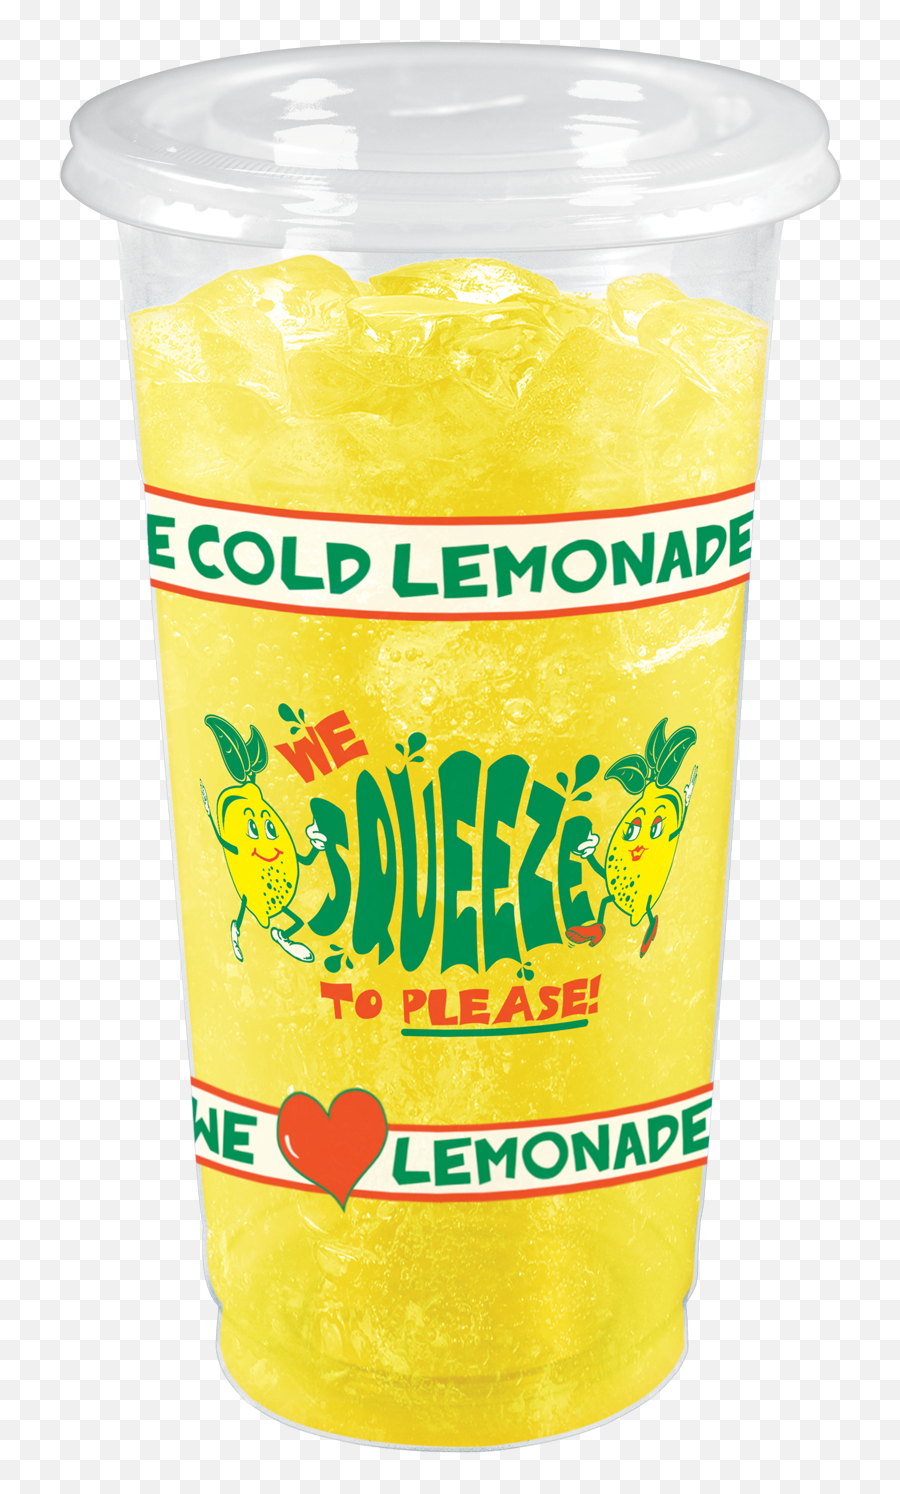 32oz Squeeze To Please Clear Cup Wlid - Cup Emoji,Pictures Of Lemonade Emojis That The Lemonade Emojis Have